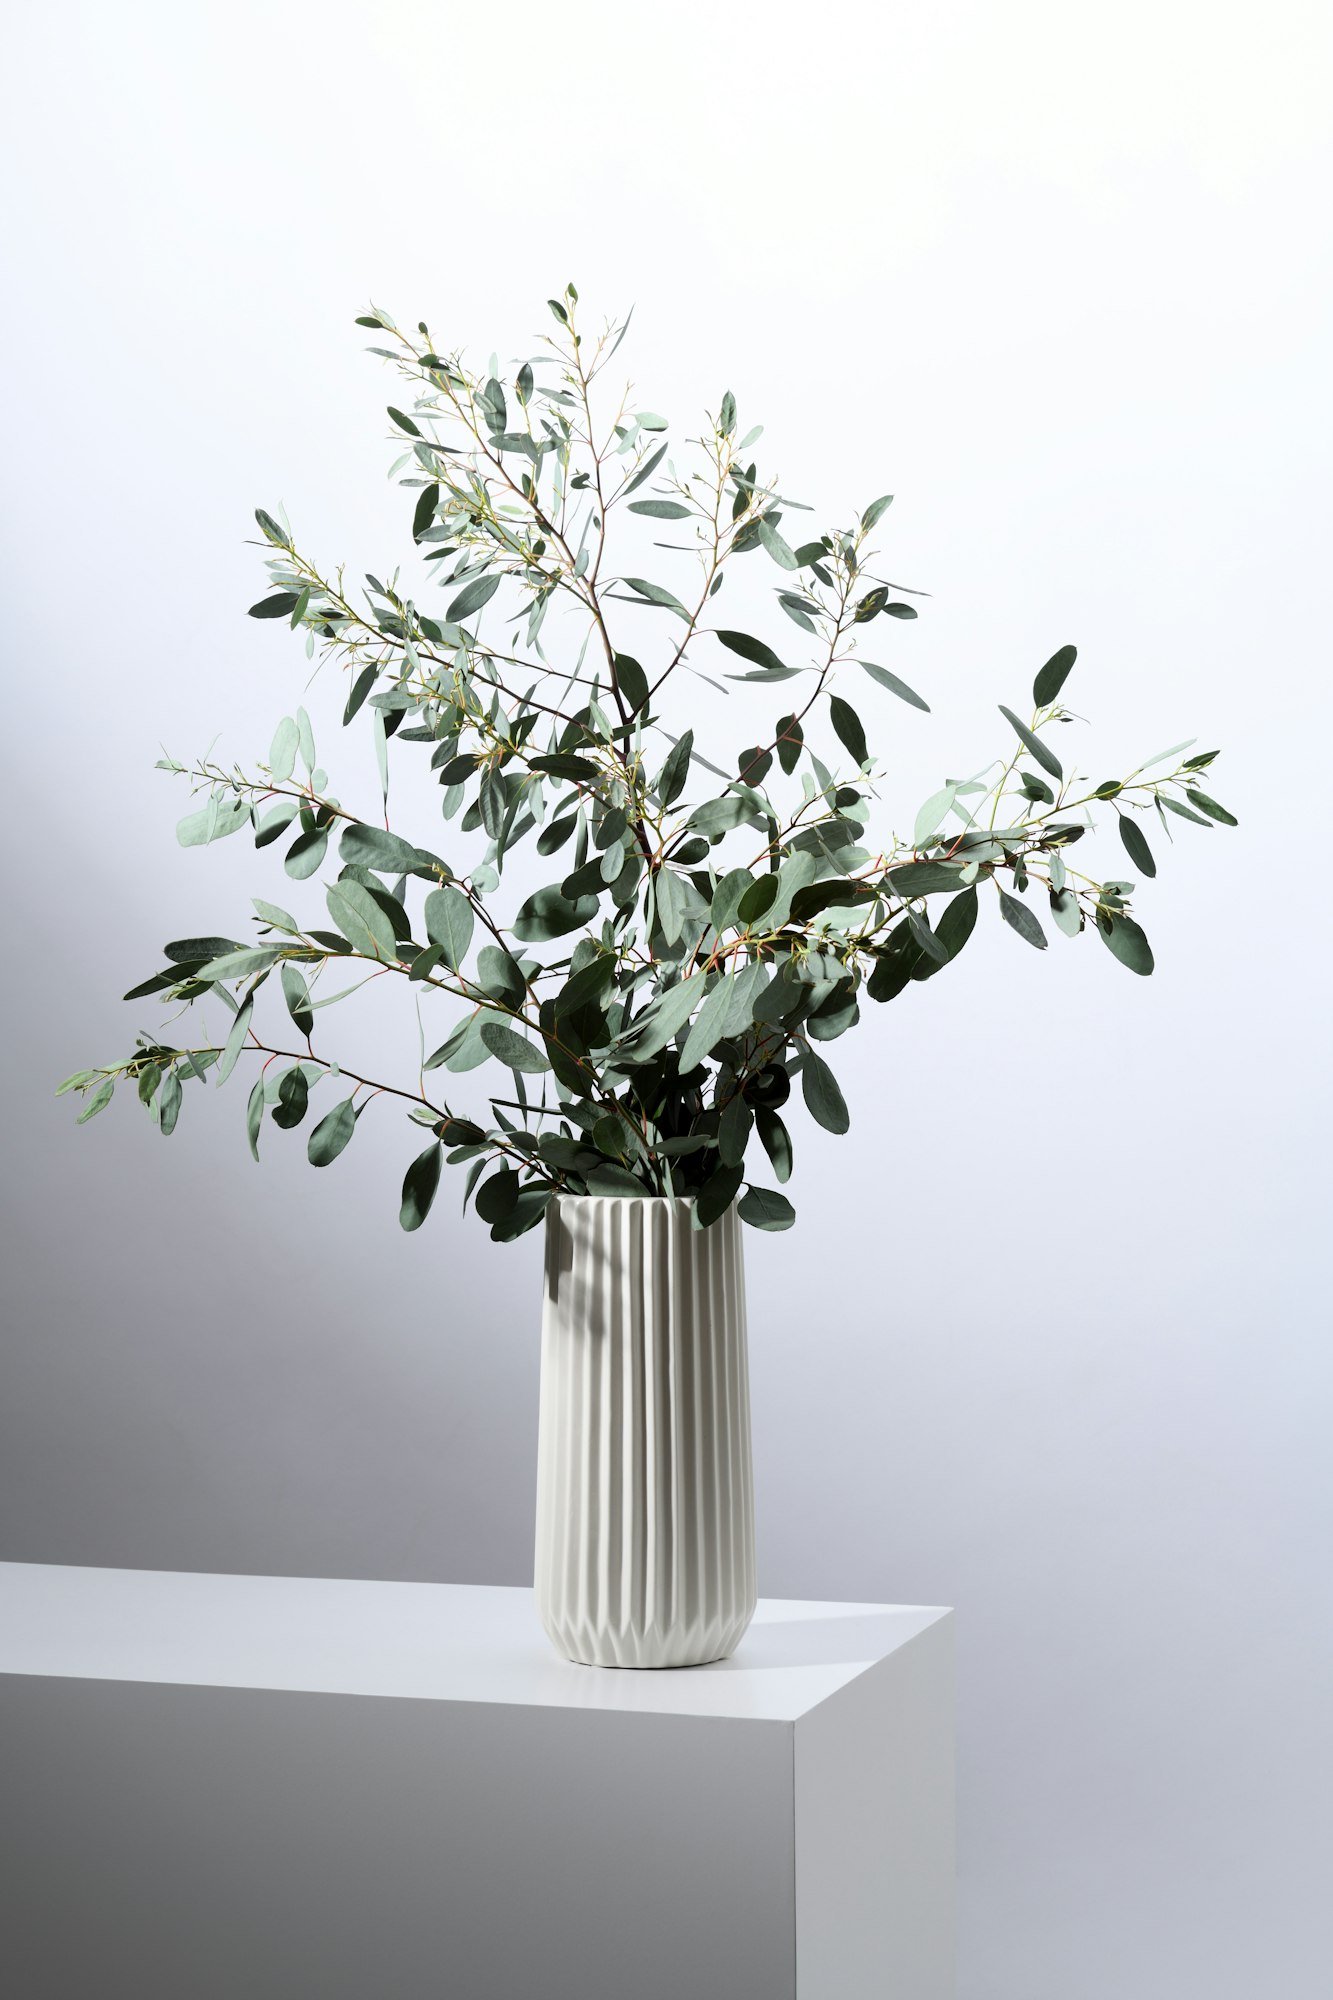 Vase with eucalyptus leaves